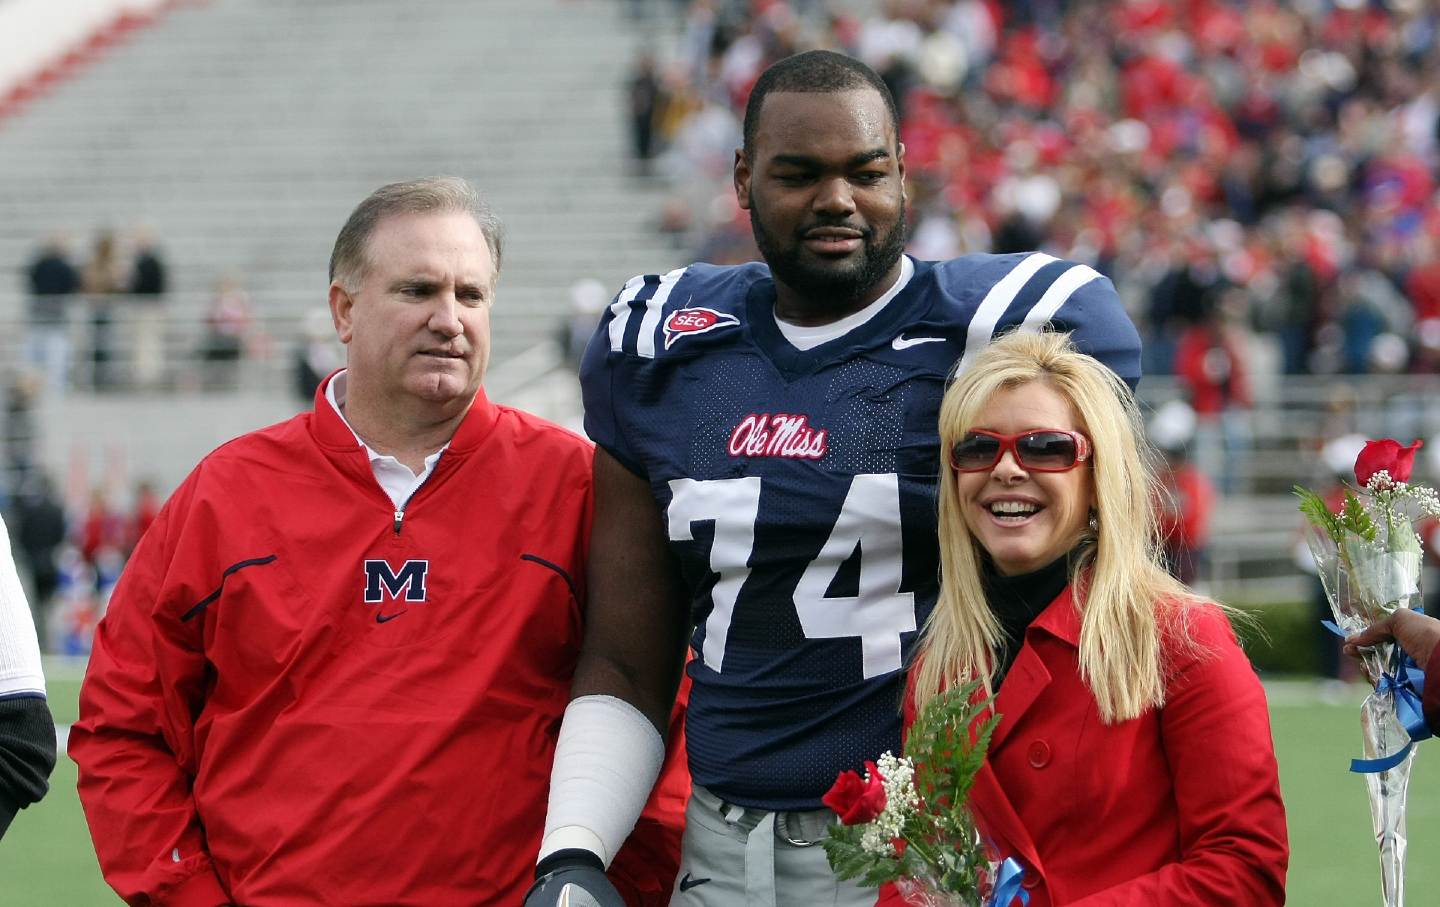 Michael Oher and the Tuohys, who are portrayed in the film The Blind Side, stand on the field before an Ole Miss game.